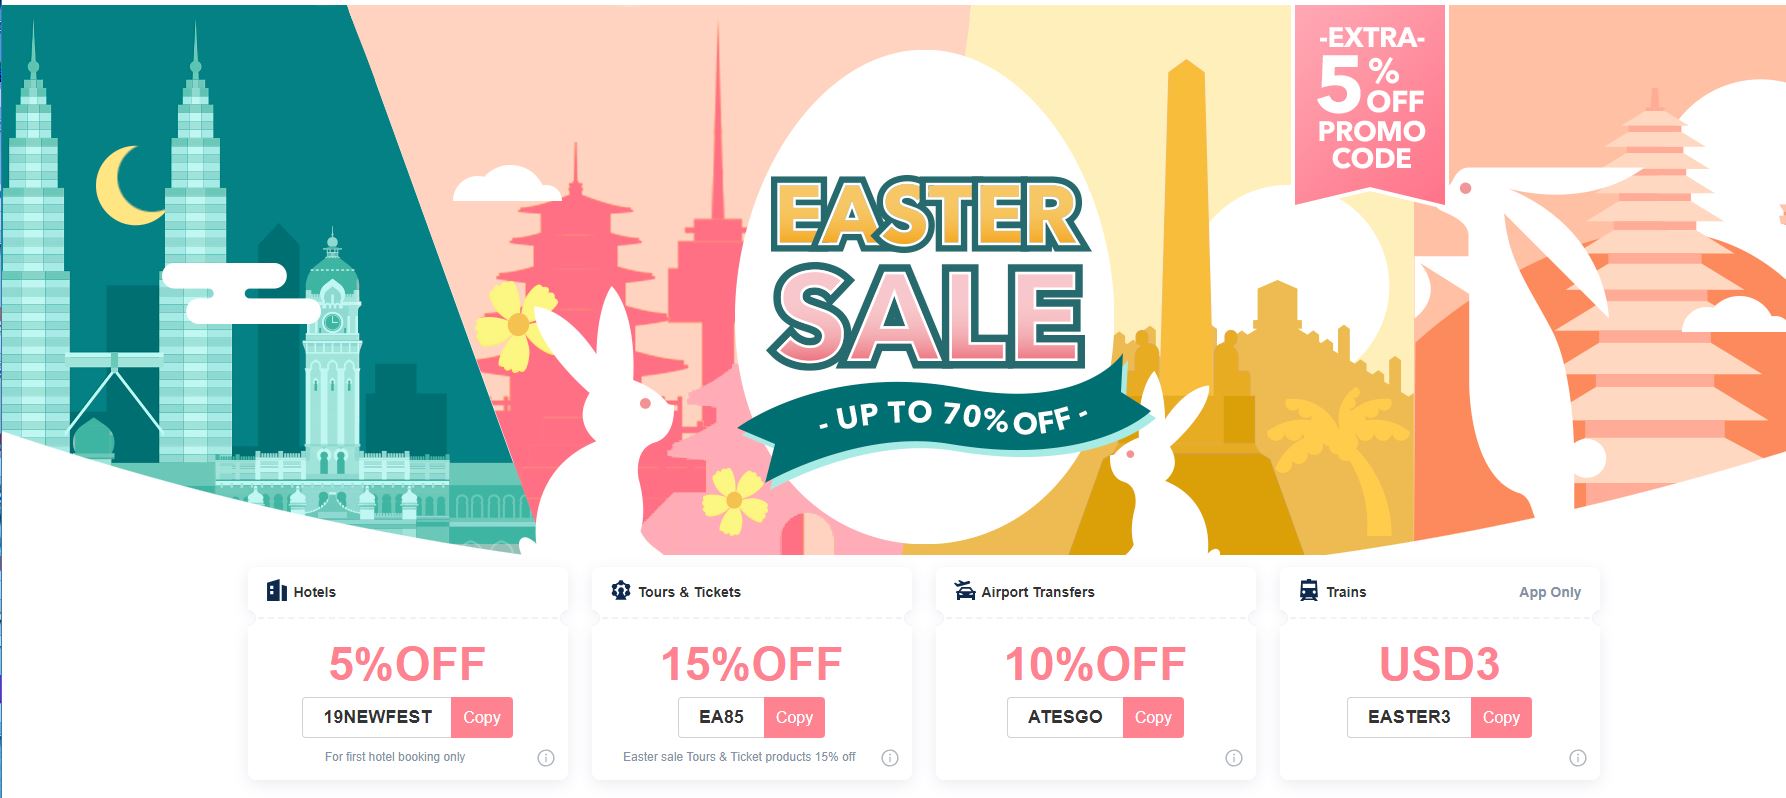 Trip Com Top Coupons Discount Promo Code For Easter 2020 Travel